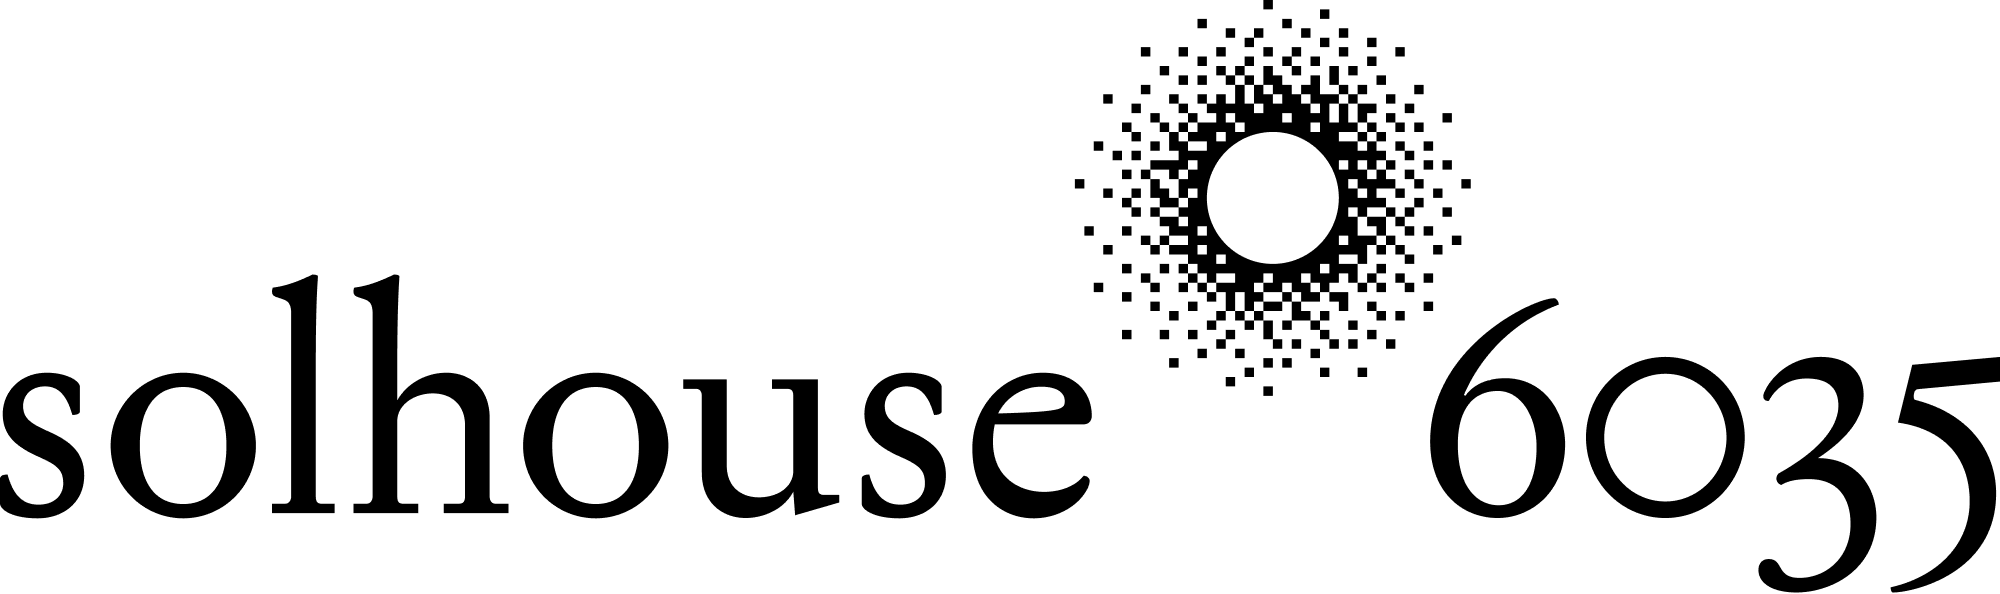 Solhouse 6035 wordmark with eclipse lockup